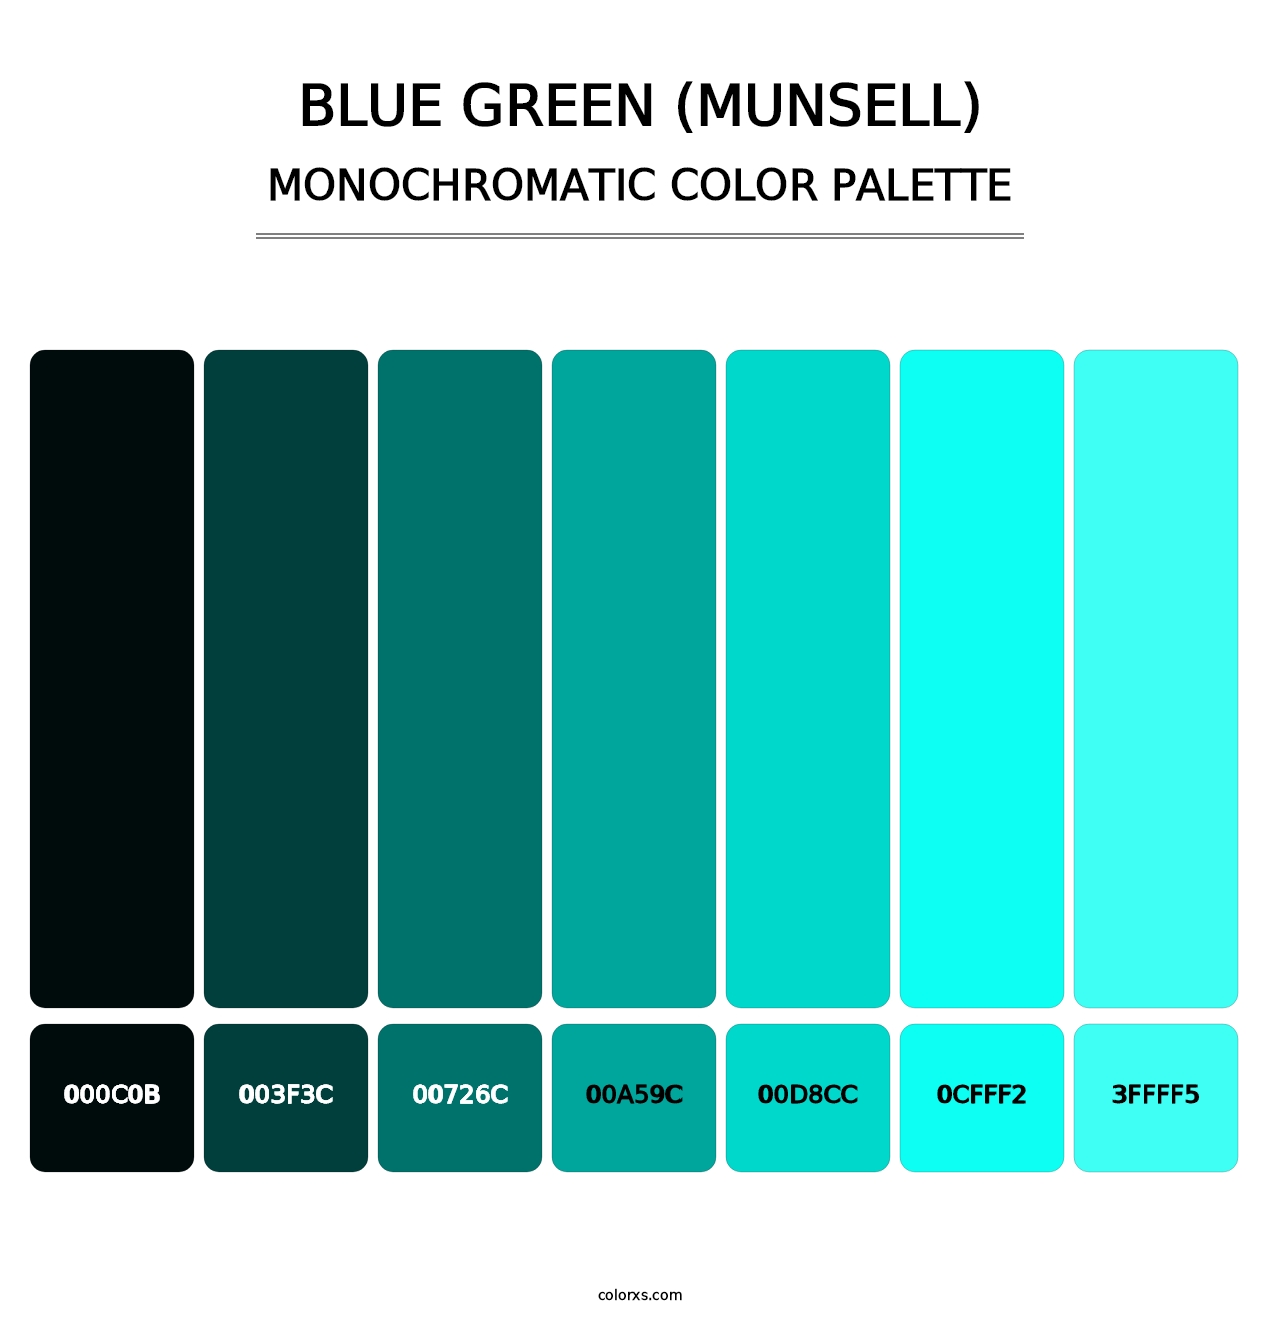 Blue Green (Munsell) - Monochromatic Color Palette